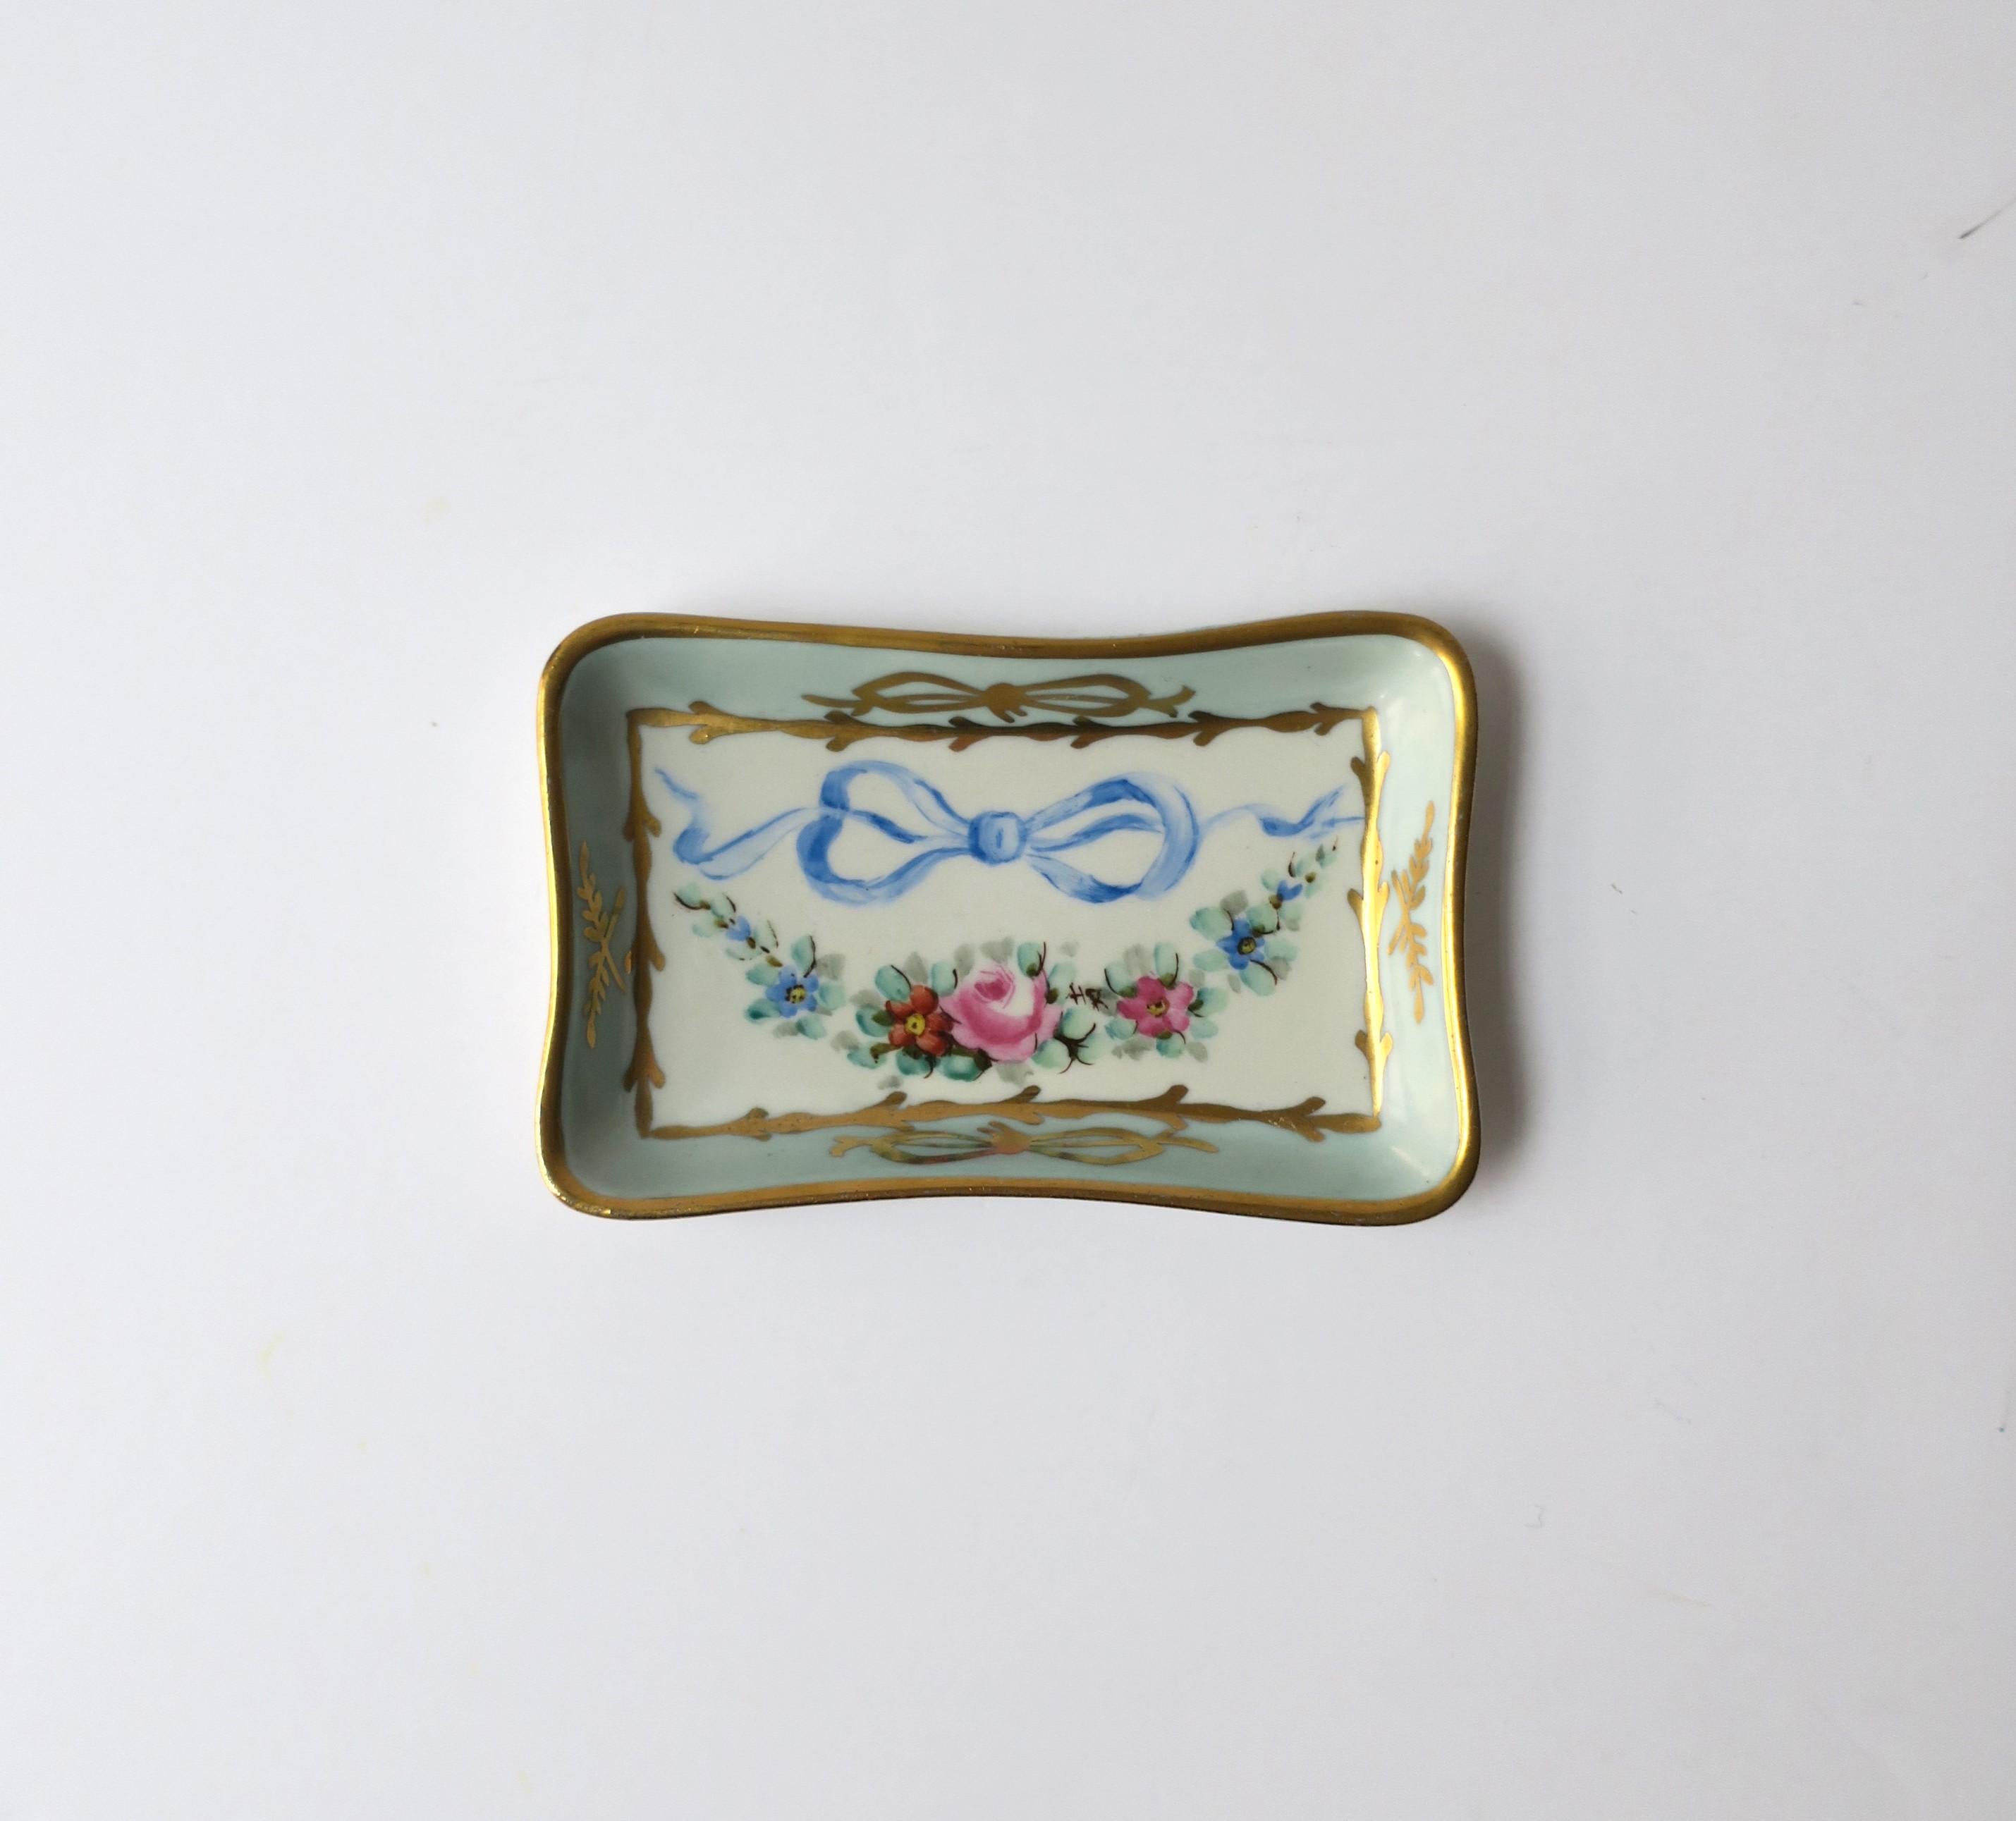 A beautiful, small, French porcelain jewelry dish with hand-painted 'chintz' design, circa early-20th century, France. A great piece to hold jewelry (as demonstrated) or other small items on a vanity, bedside/nightstand table, etc. Colors include